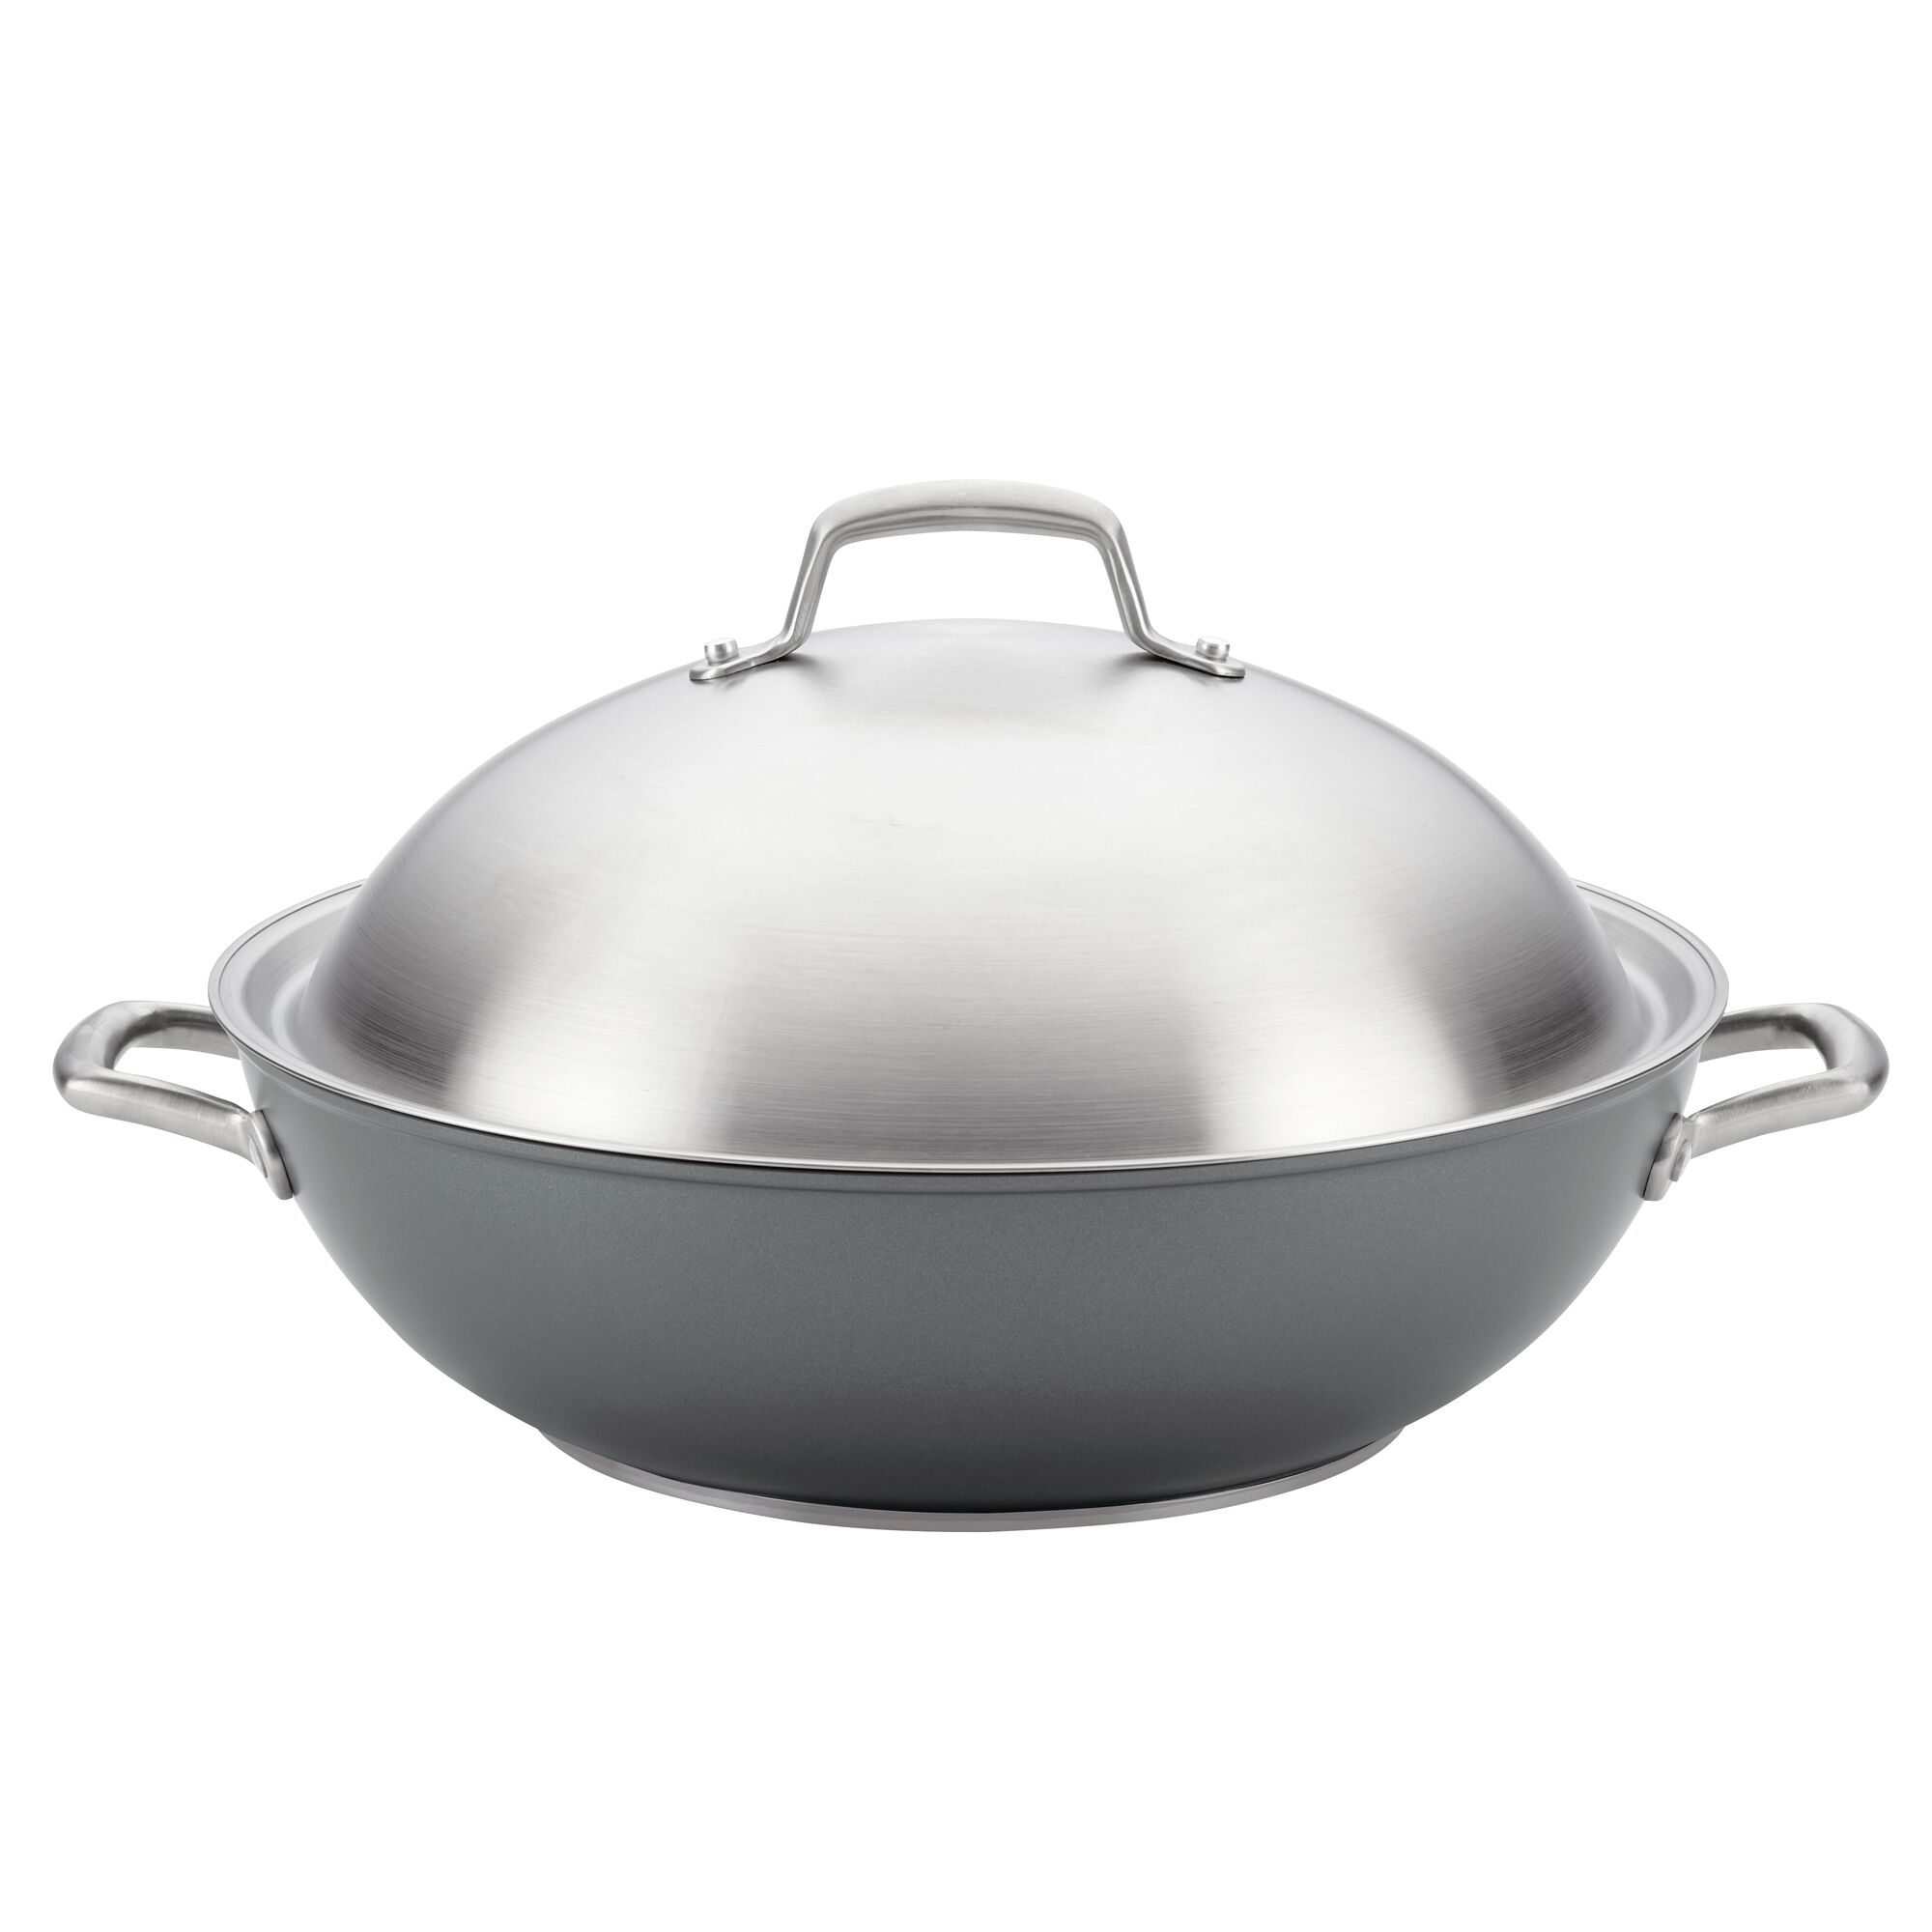 Anolon Accolade 13.5-Inch Wok with Lid